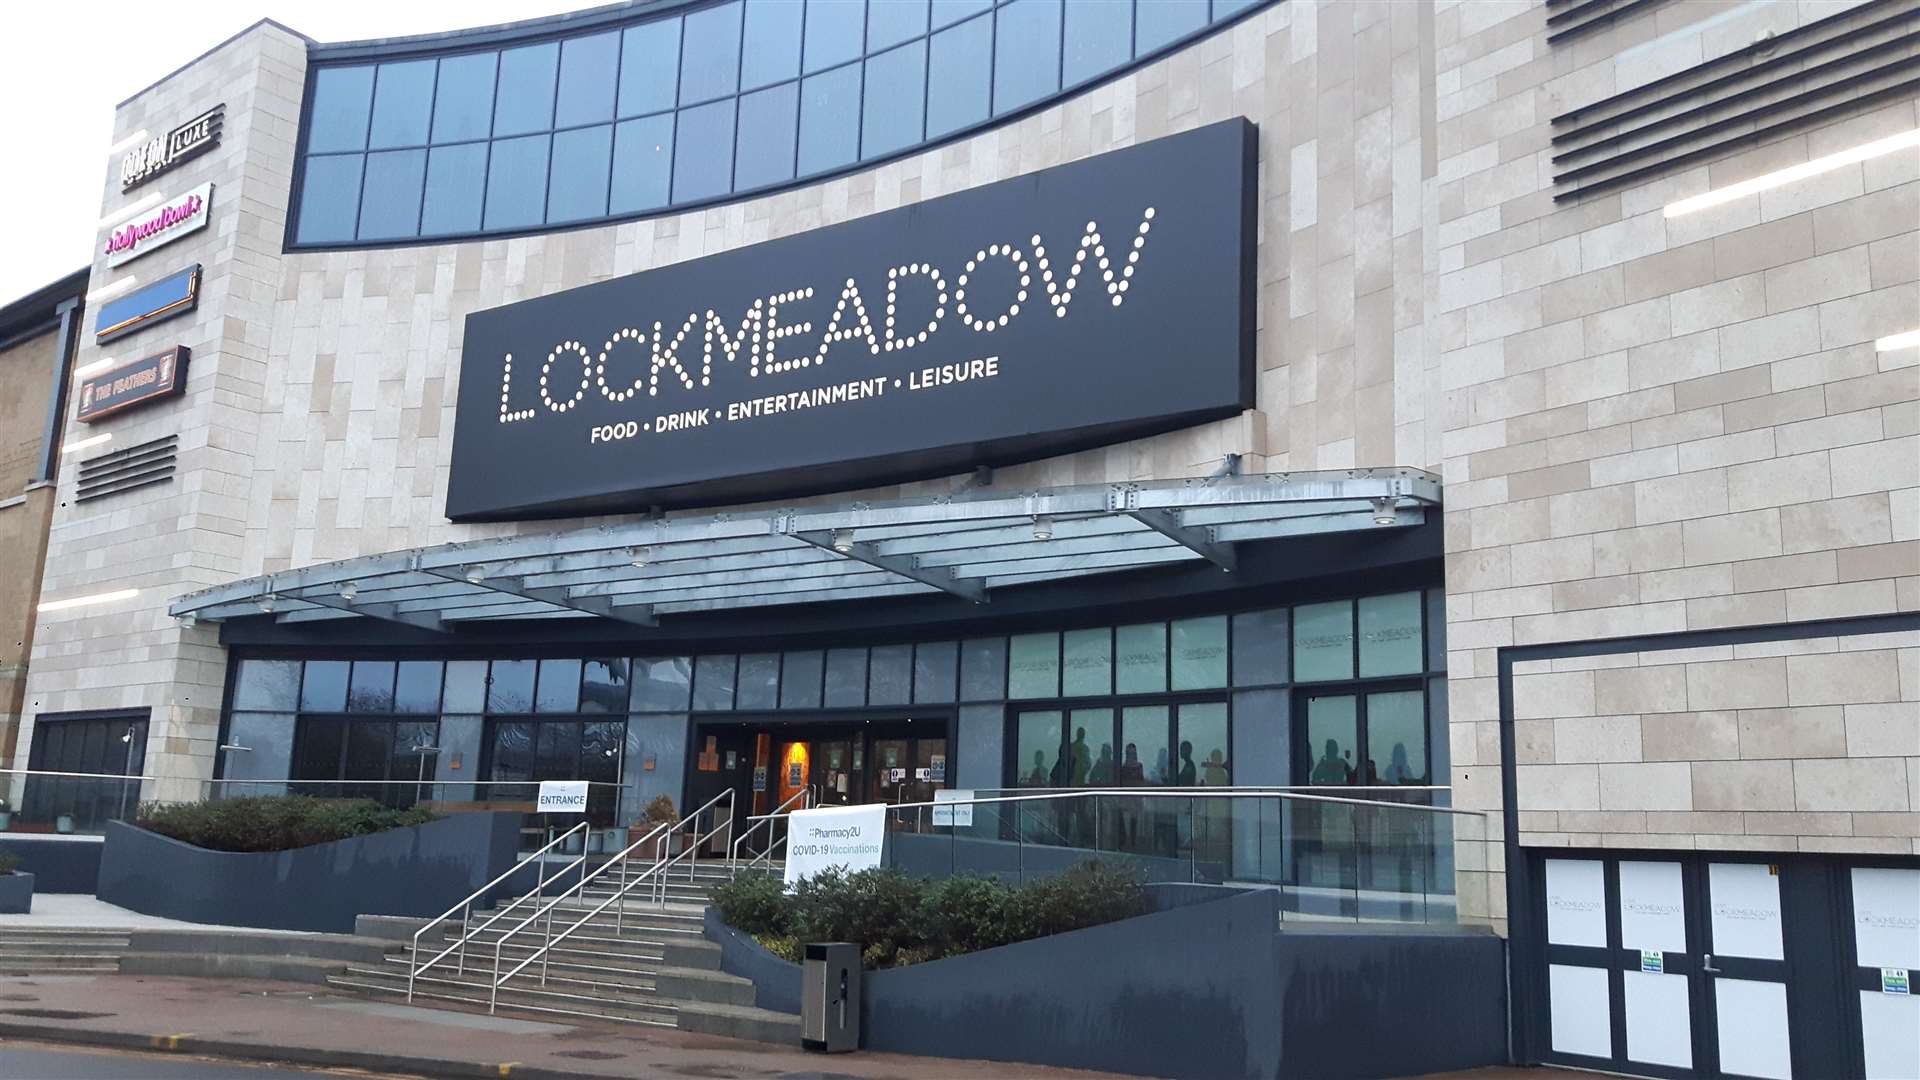 There are big changes ahead at Lockmeadow Leisure Centre